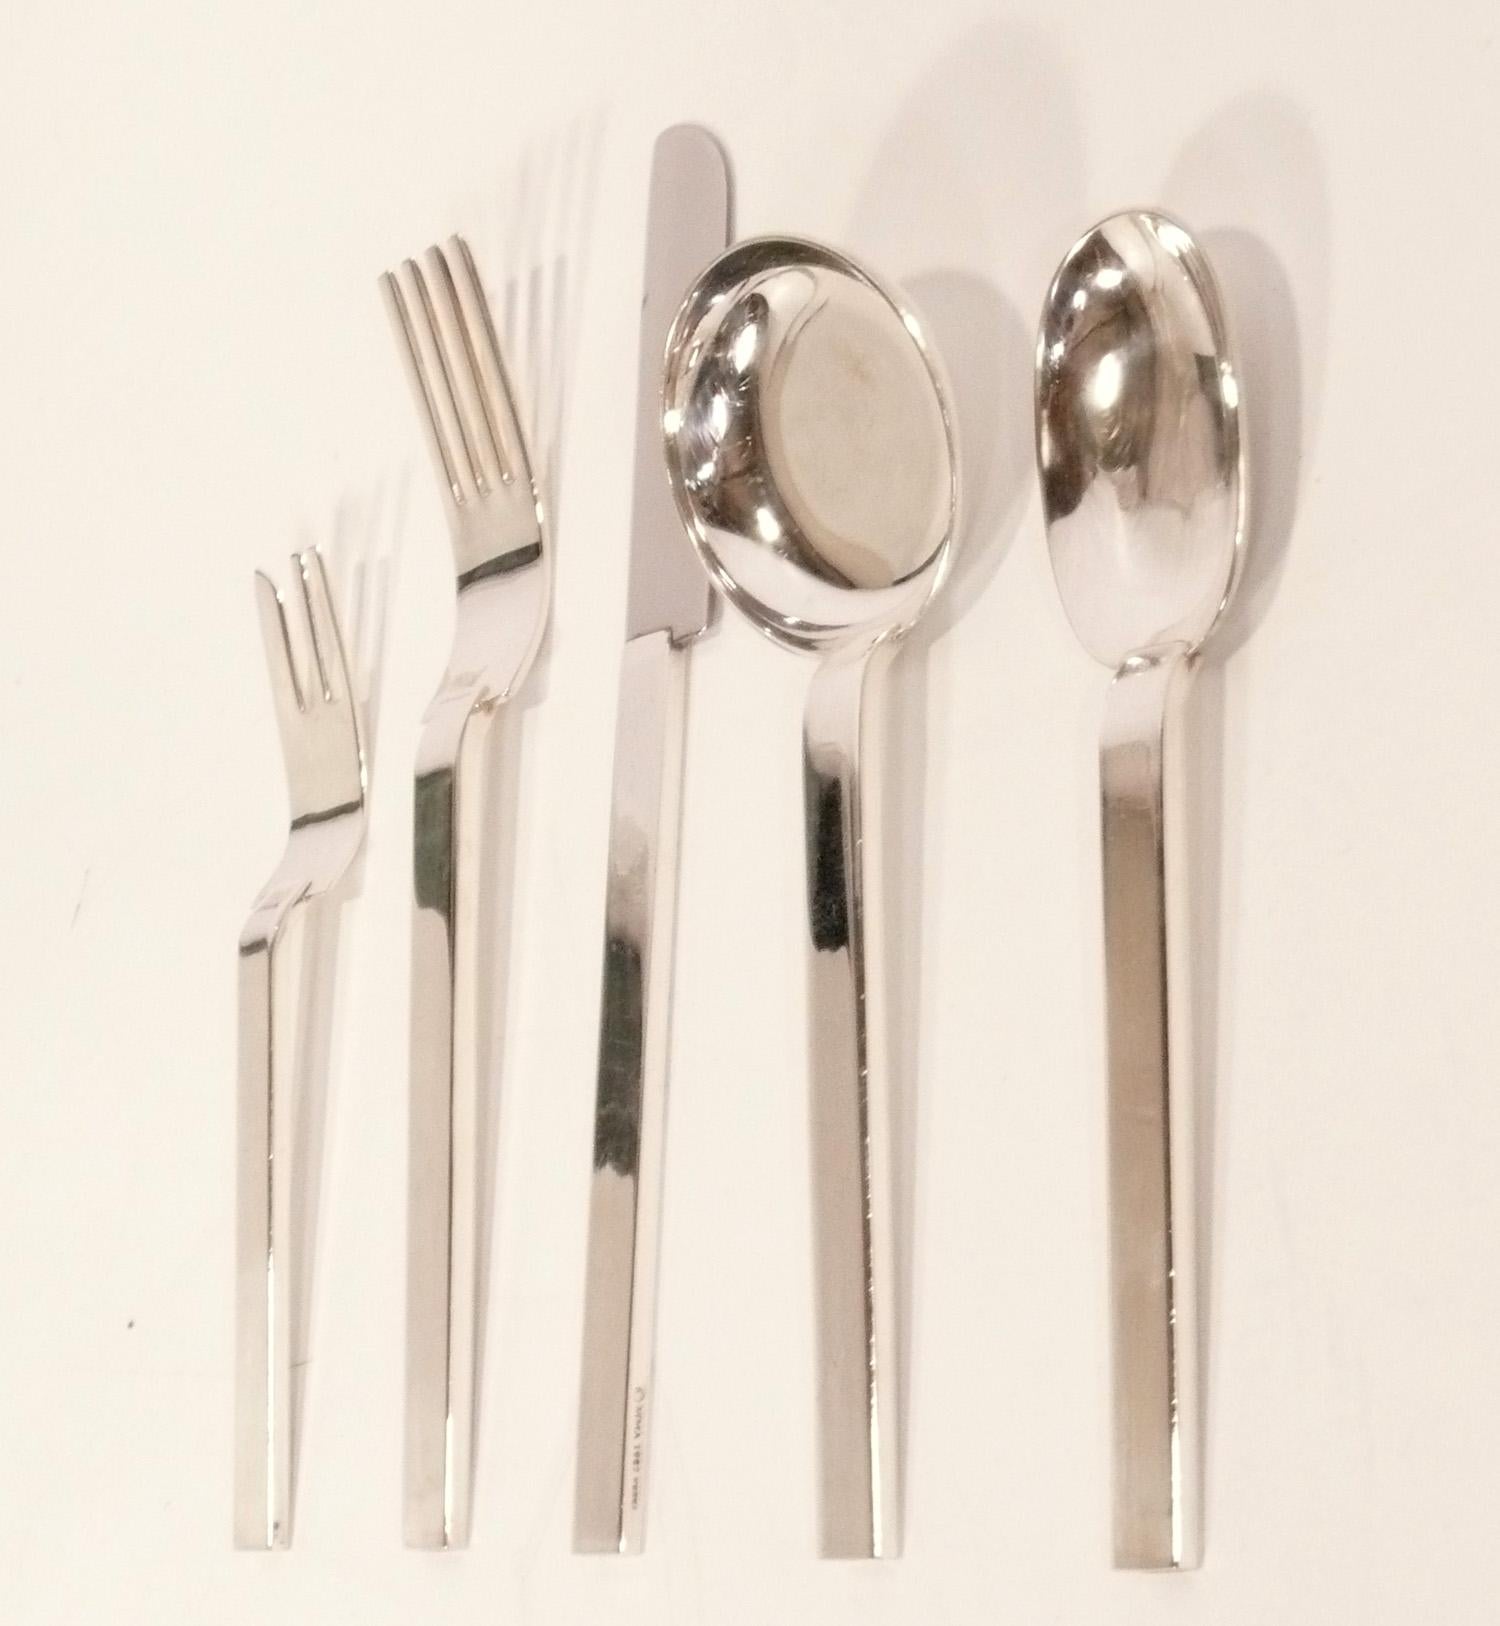 Streamlined Art Deco Style Silver Plated Flatware, designed by Russel Wright, American, circa 1980s. This flatware set was originally designed by Wright in 1933 and never produced. It was finally produced in 1987 for the Metropolitan Museum of Art